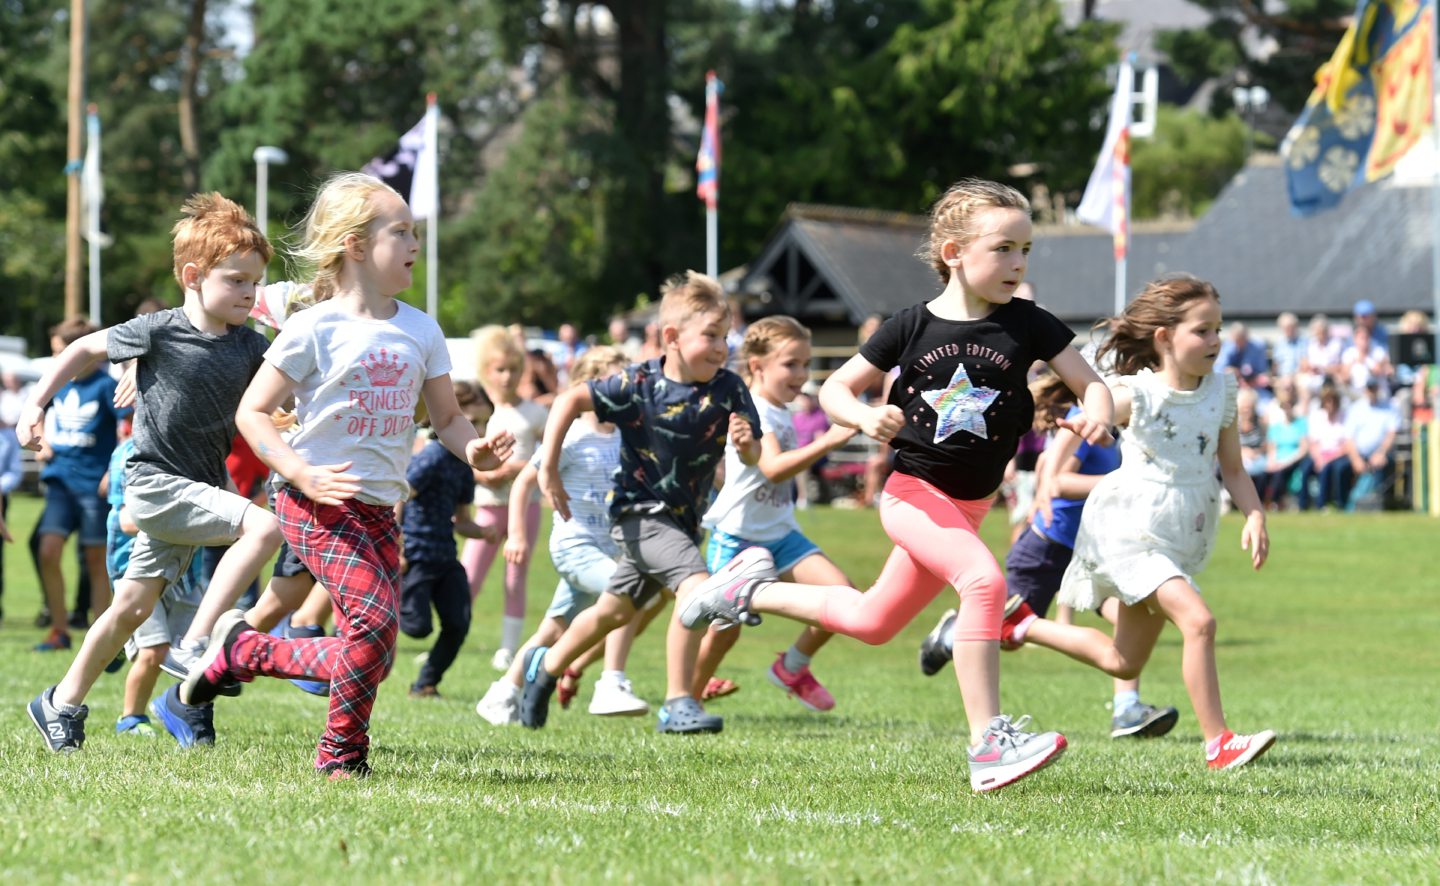 Children taking part in a Highland games race.